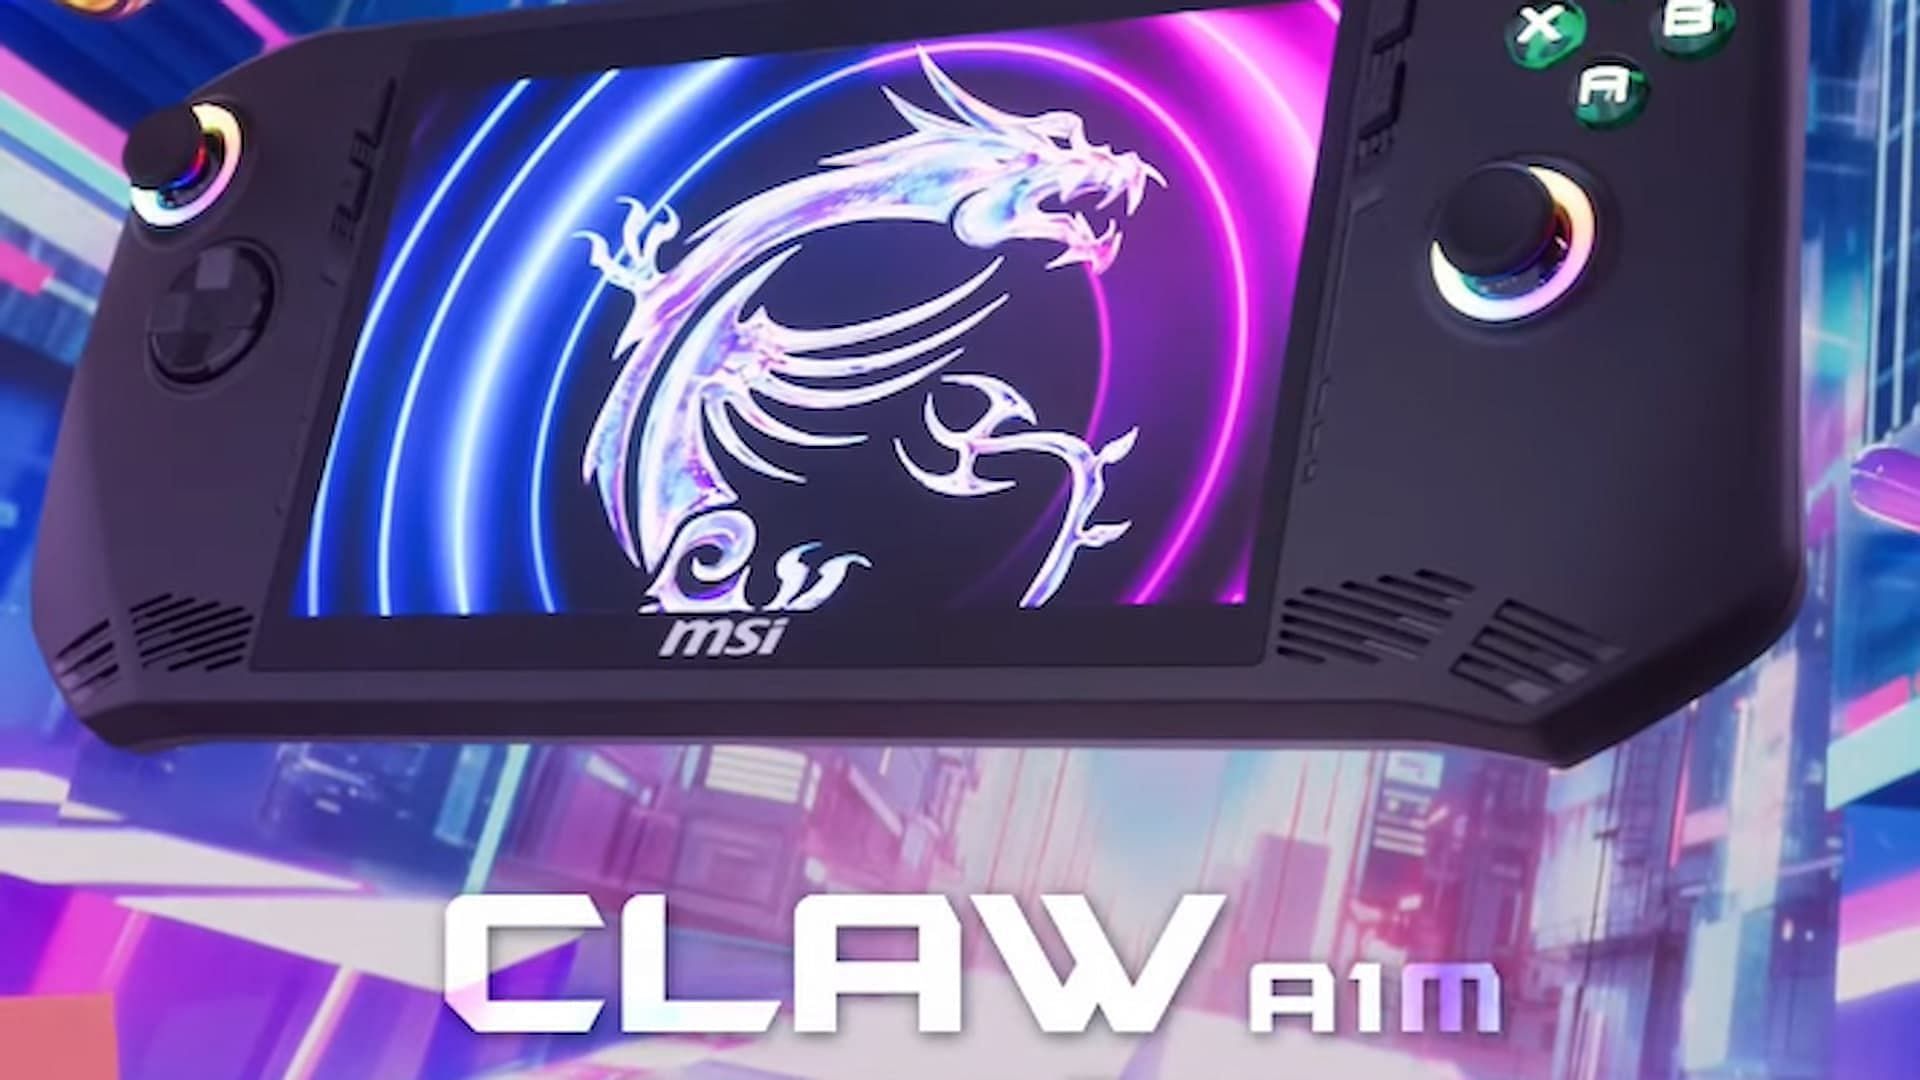 The MSI Claw starts at an MSRP of $599 (Image via MSI)